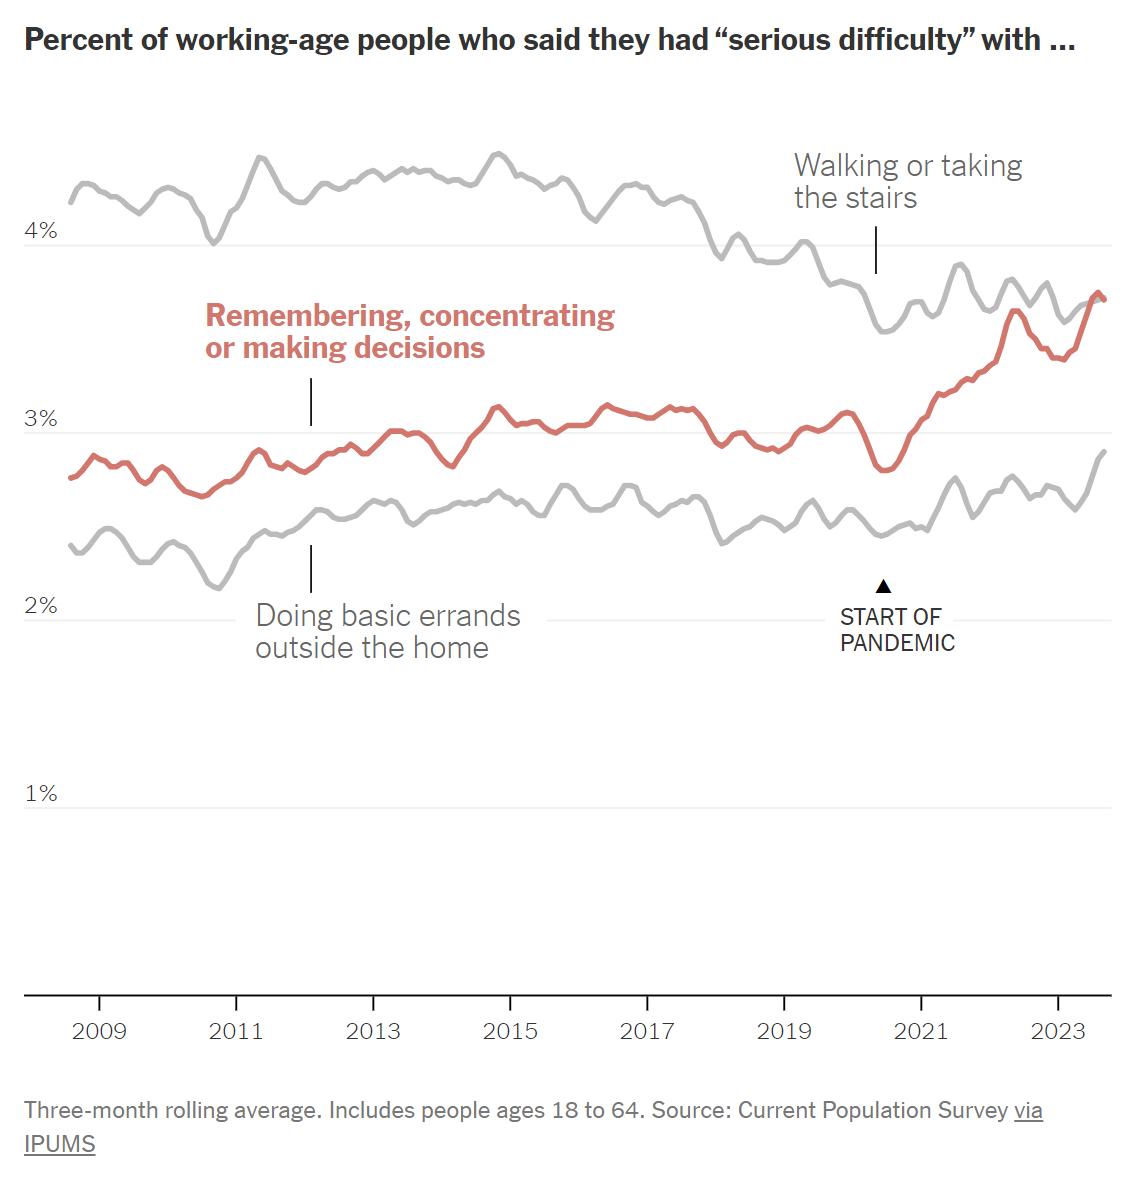 Survey results showing number of working-age people in the U.S. who said they had “serious difficulty” with three different tasks, 2009-2023. Three-month rolling average. Includes people ages 18 to 64. Data: Current Population Survey via IPUMS. Graphic: The New York Times